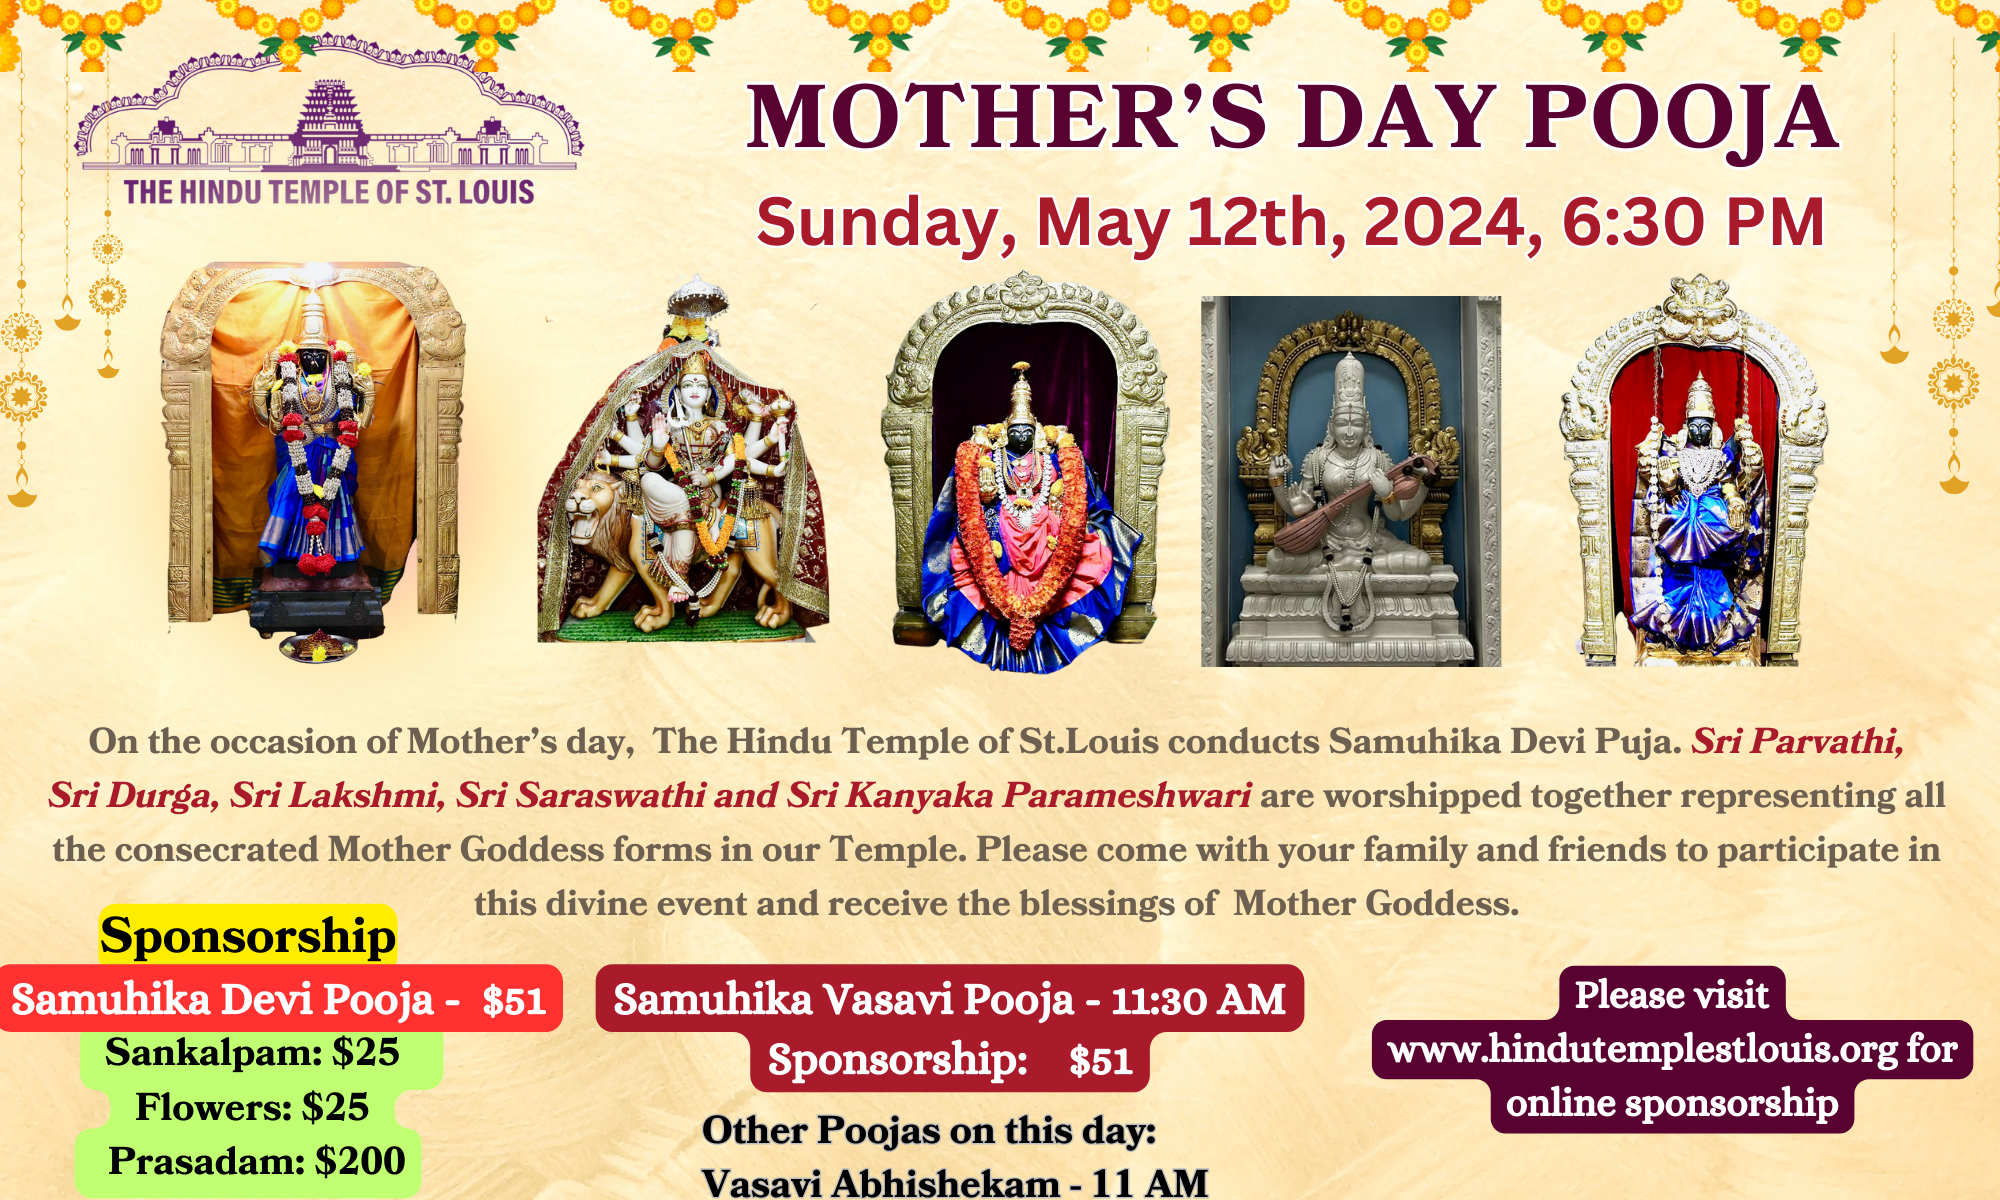 MOTHER’S DAY POOJA – 05/14 @ 5 PM